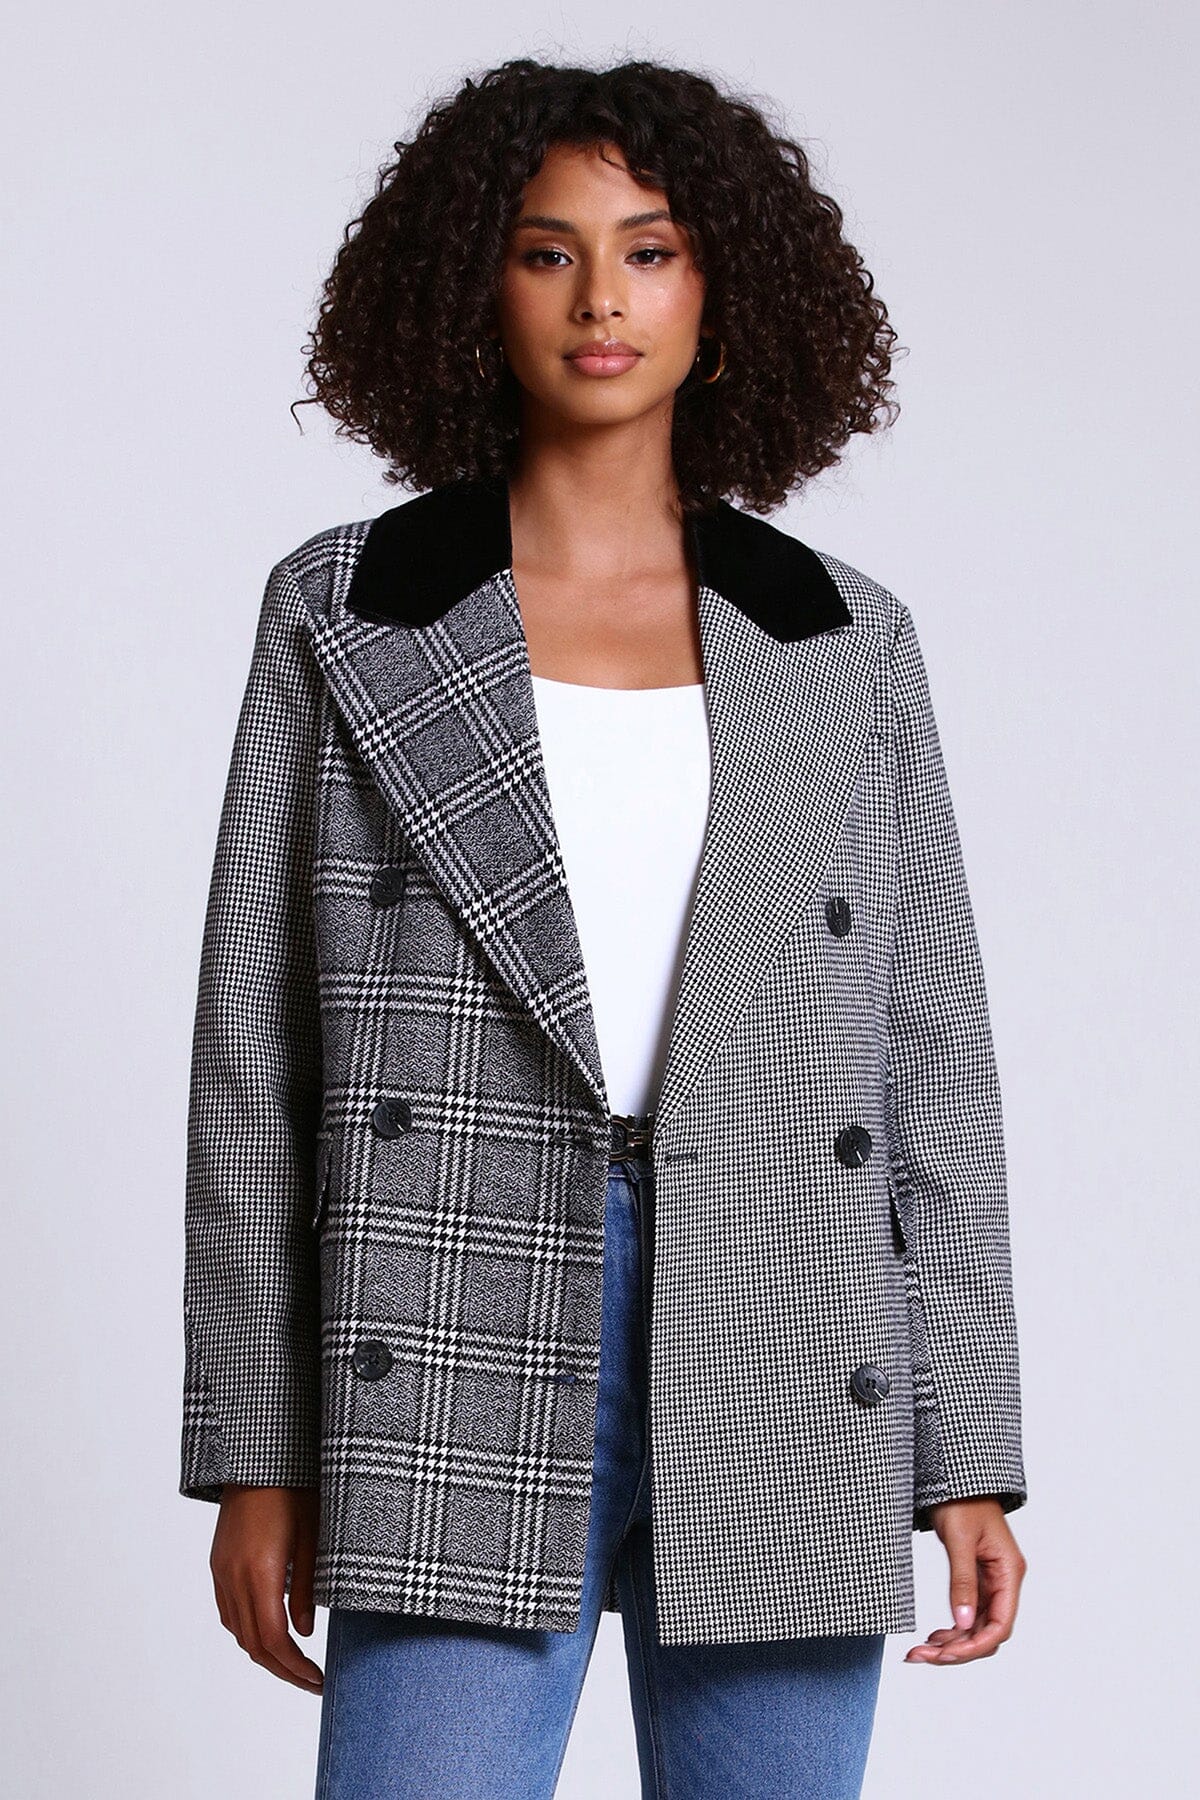 houndstooth mixed media plaid double breasted blazer coat jacket - figure flattering day to night coats jackets blazers outerwear